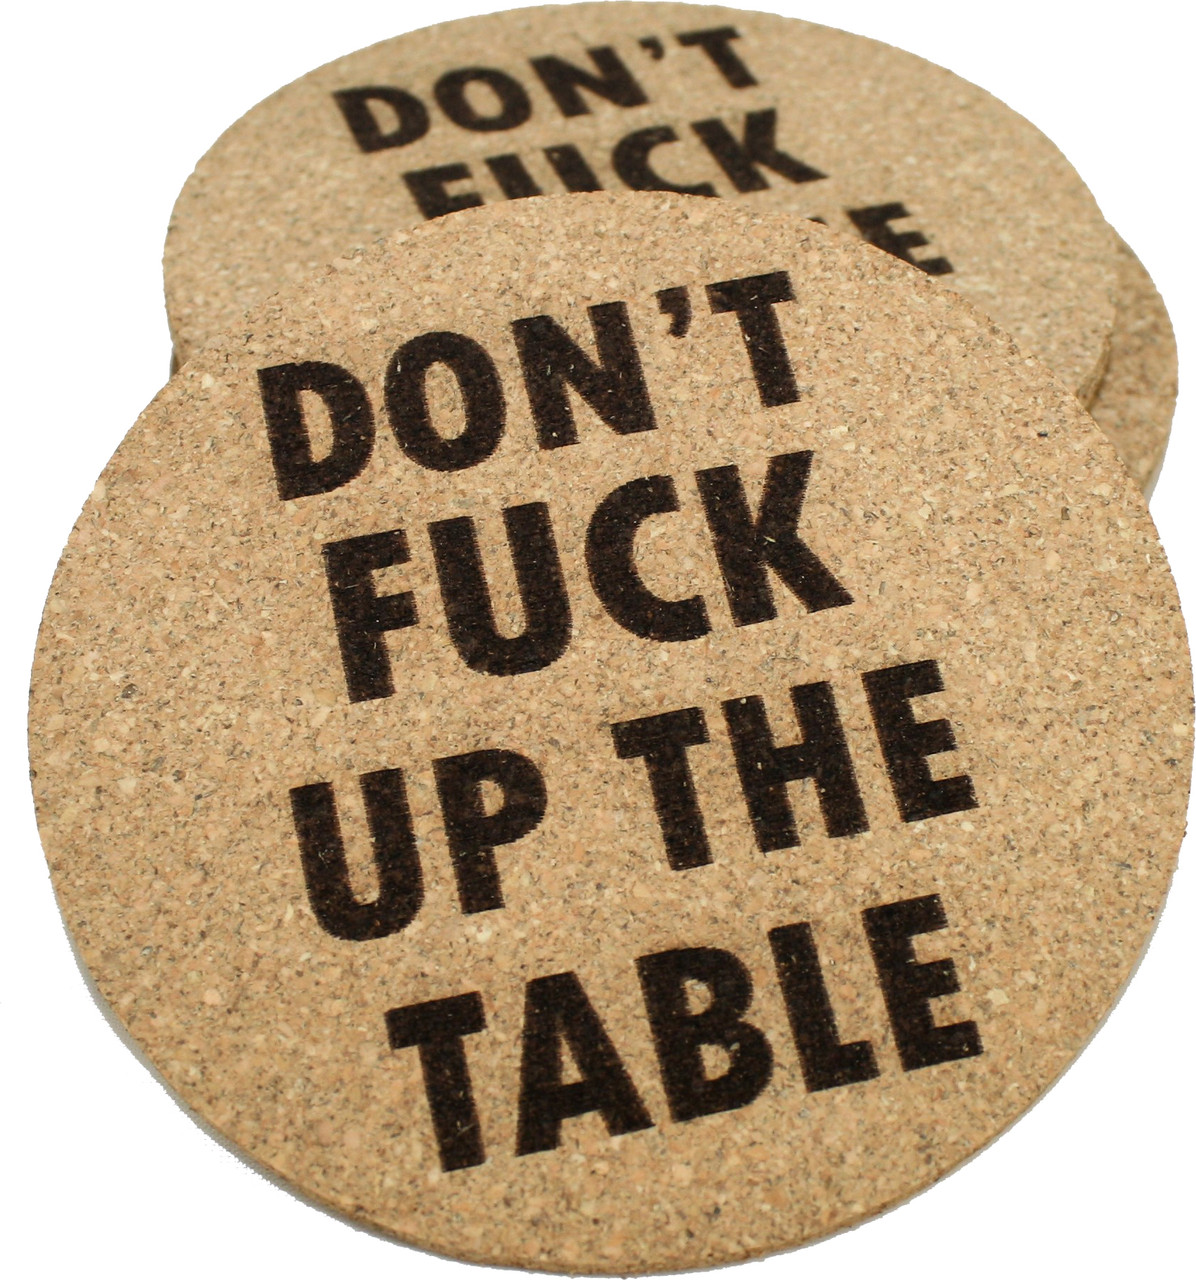 Don't Fuck Up The Table Cork Coasters